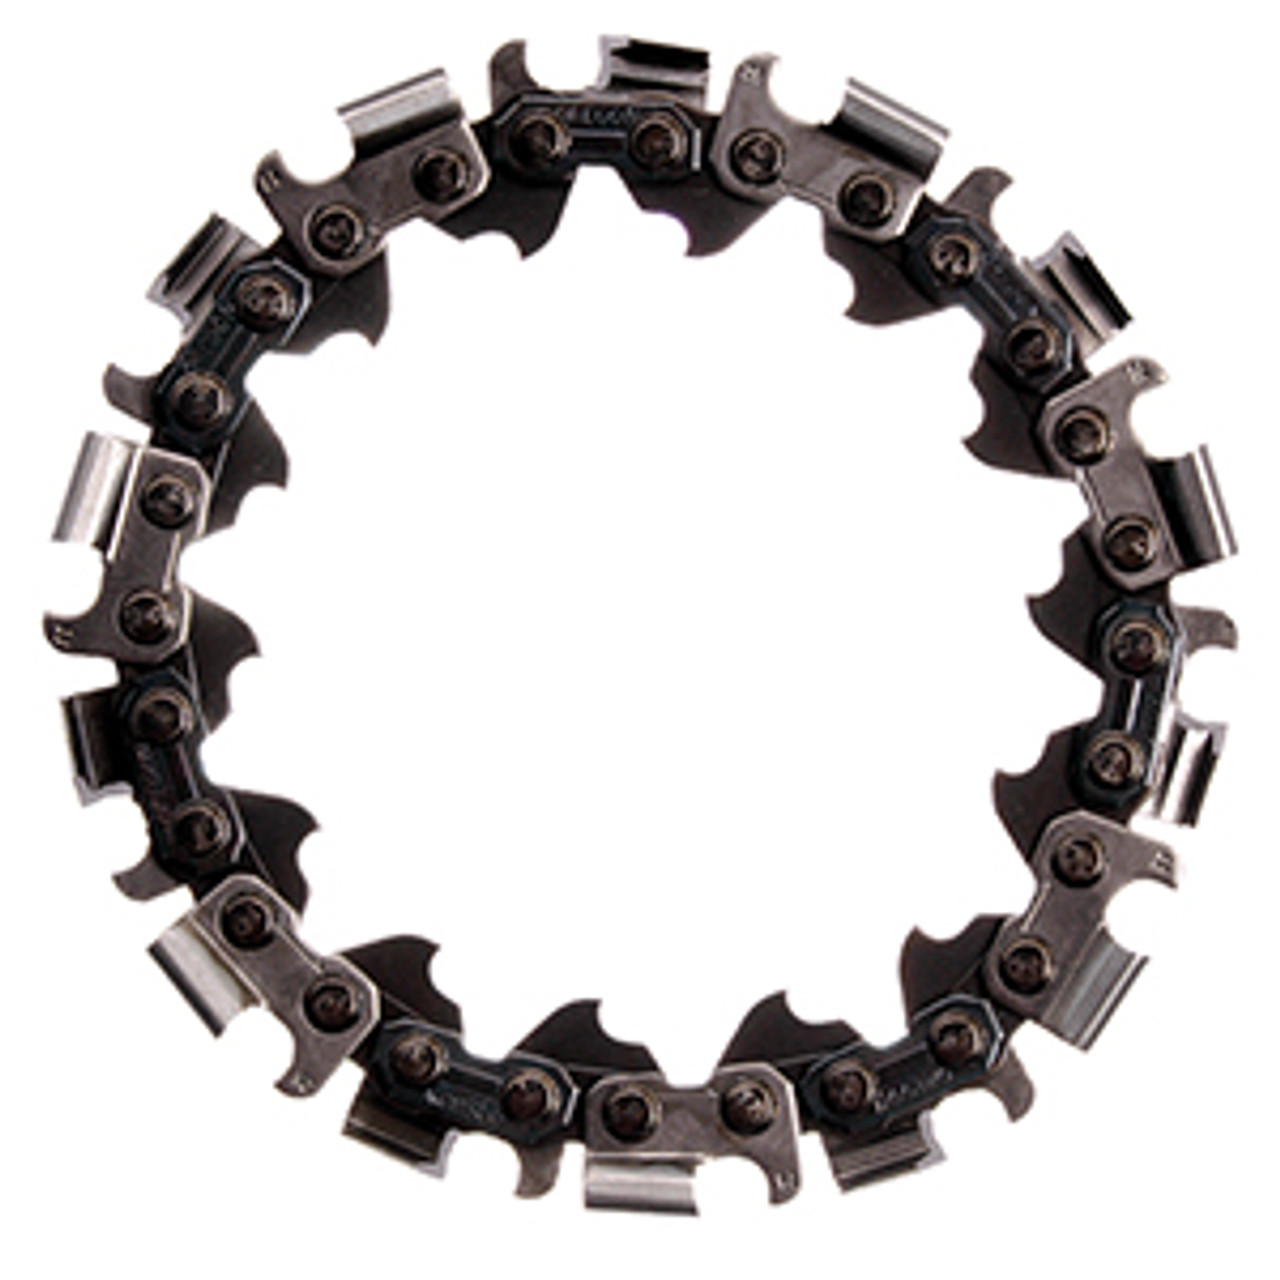 King Arthur's Lancelot 14 Tooth Replacement Chain